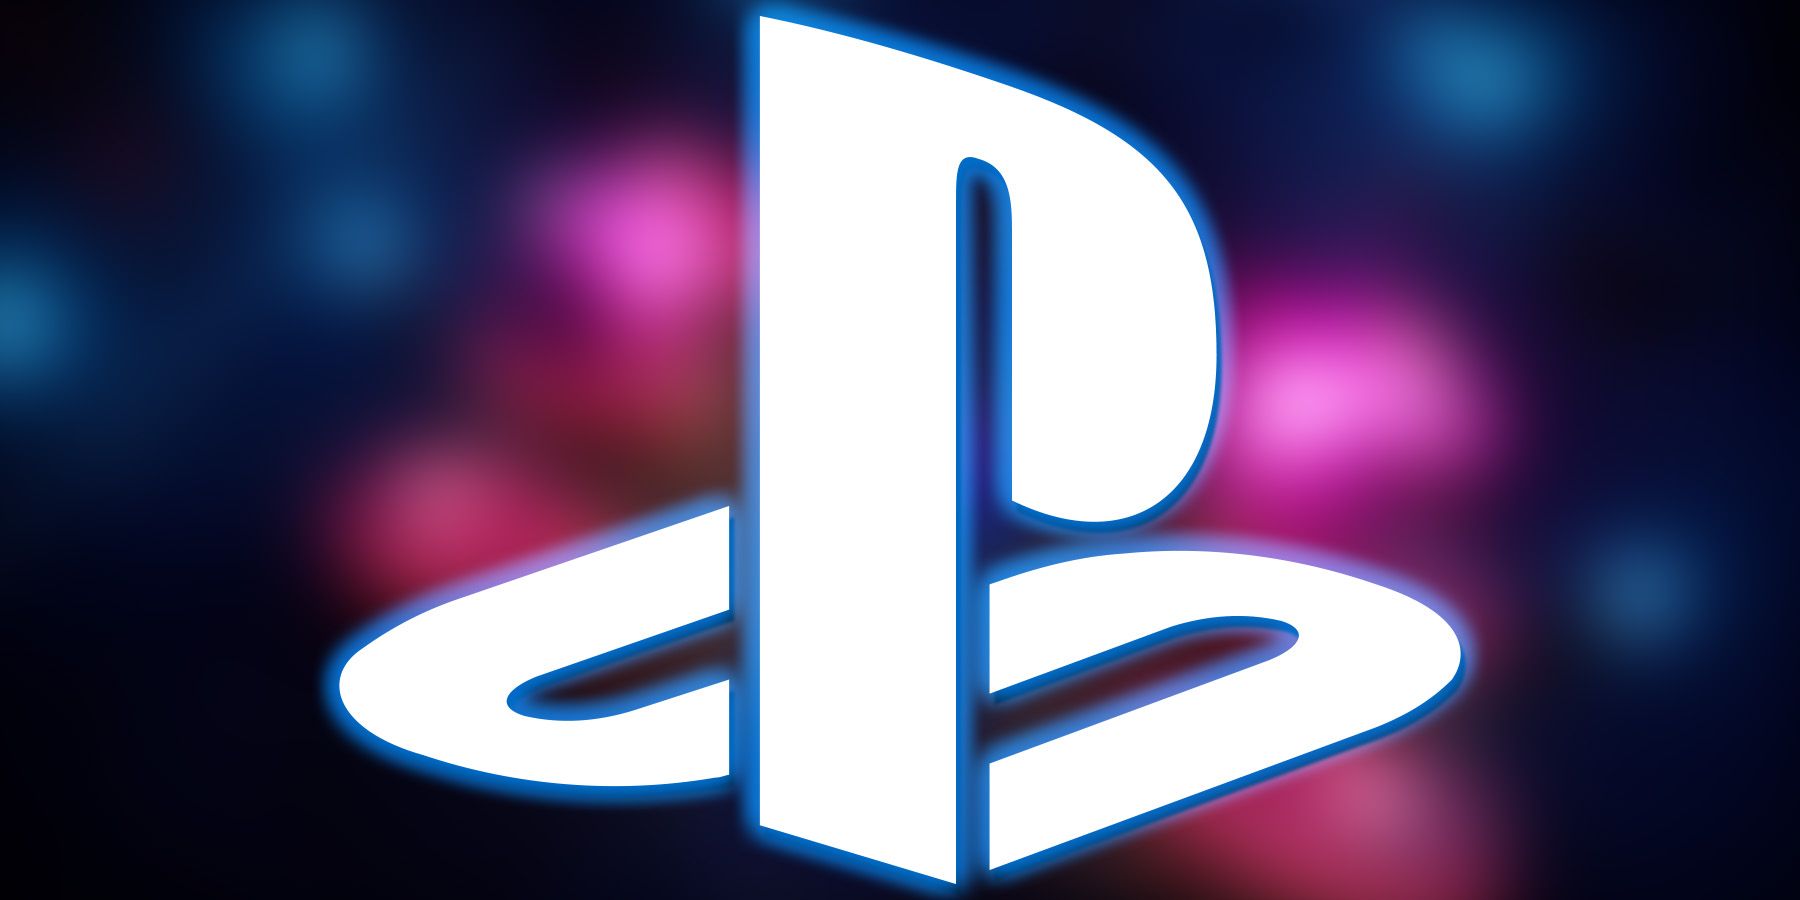 White PlayStation logo emblem submark with light blue outer glow on blurred V Rising dungeon screenshot